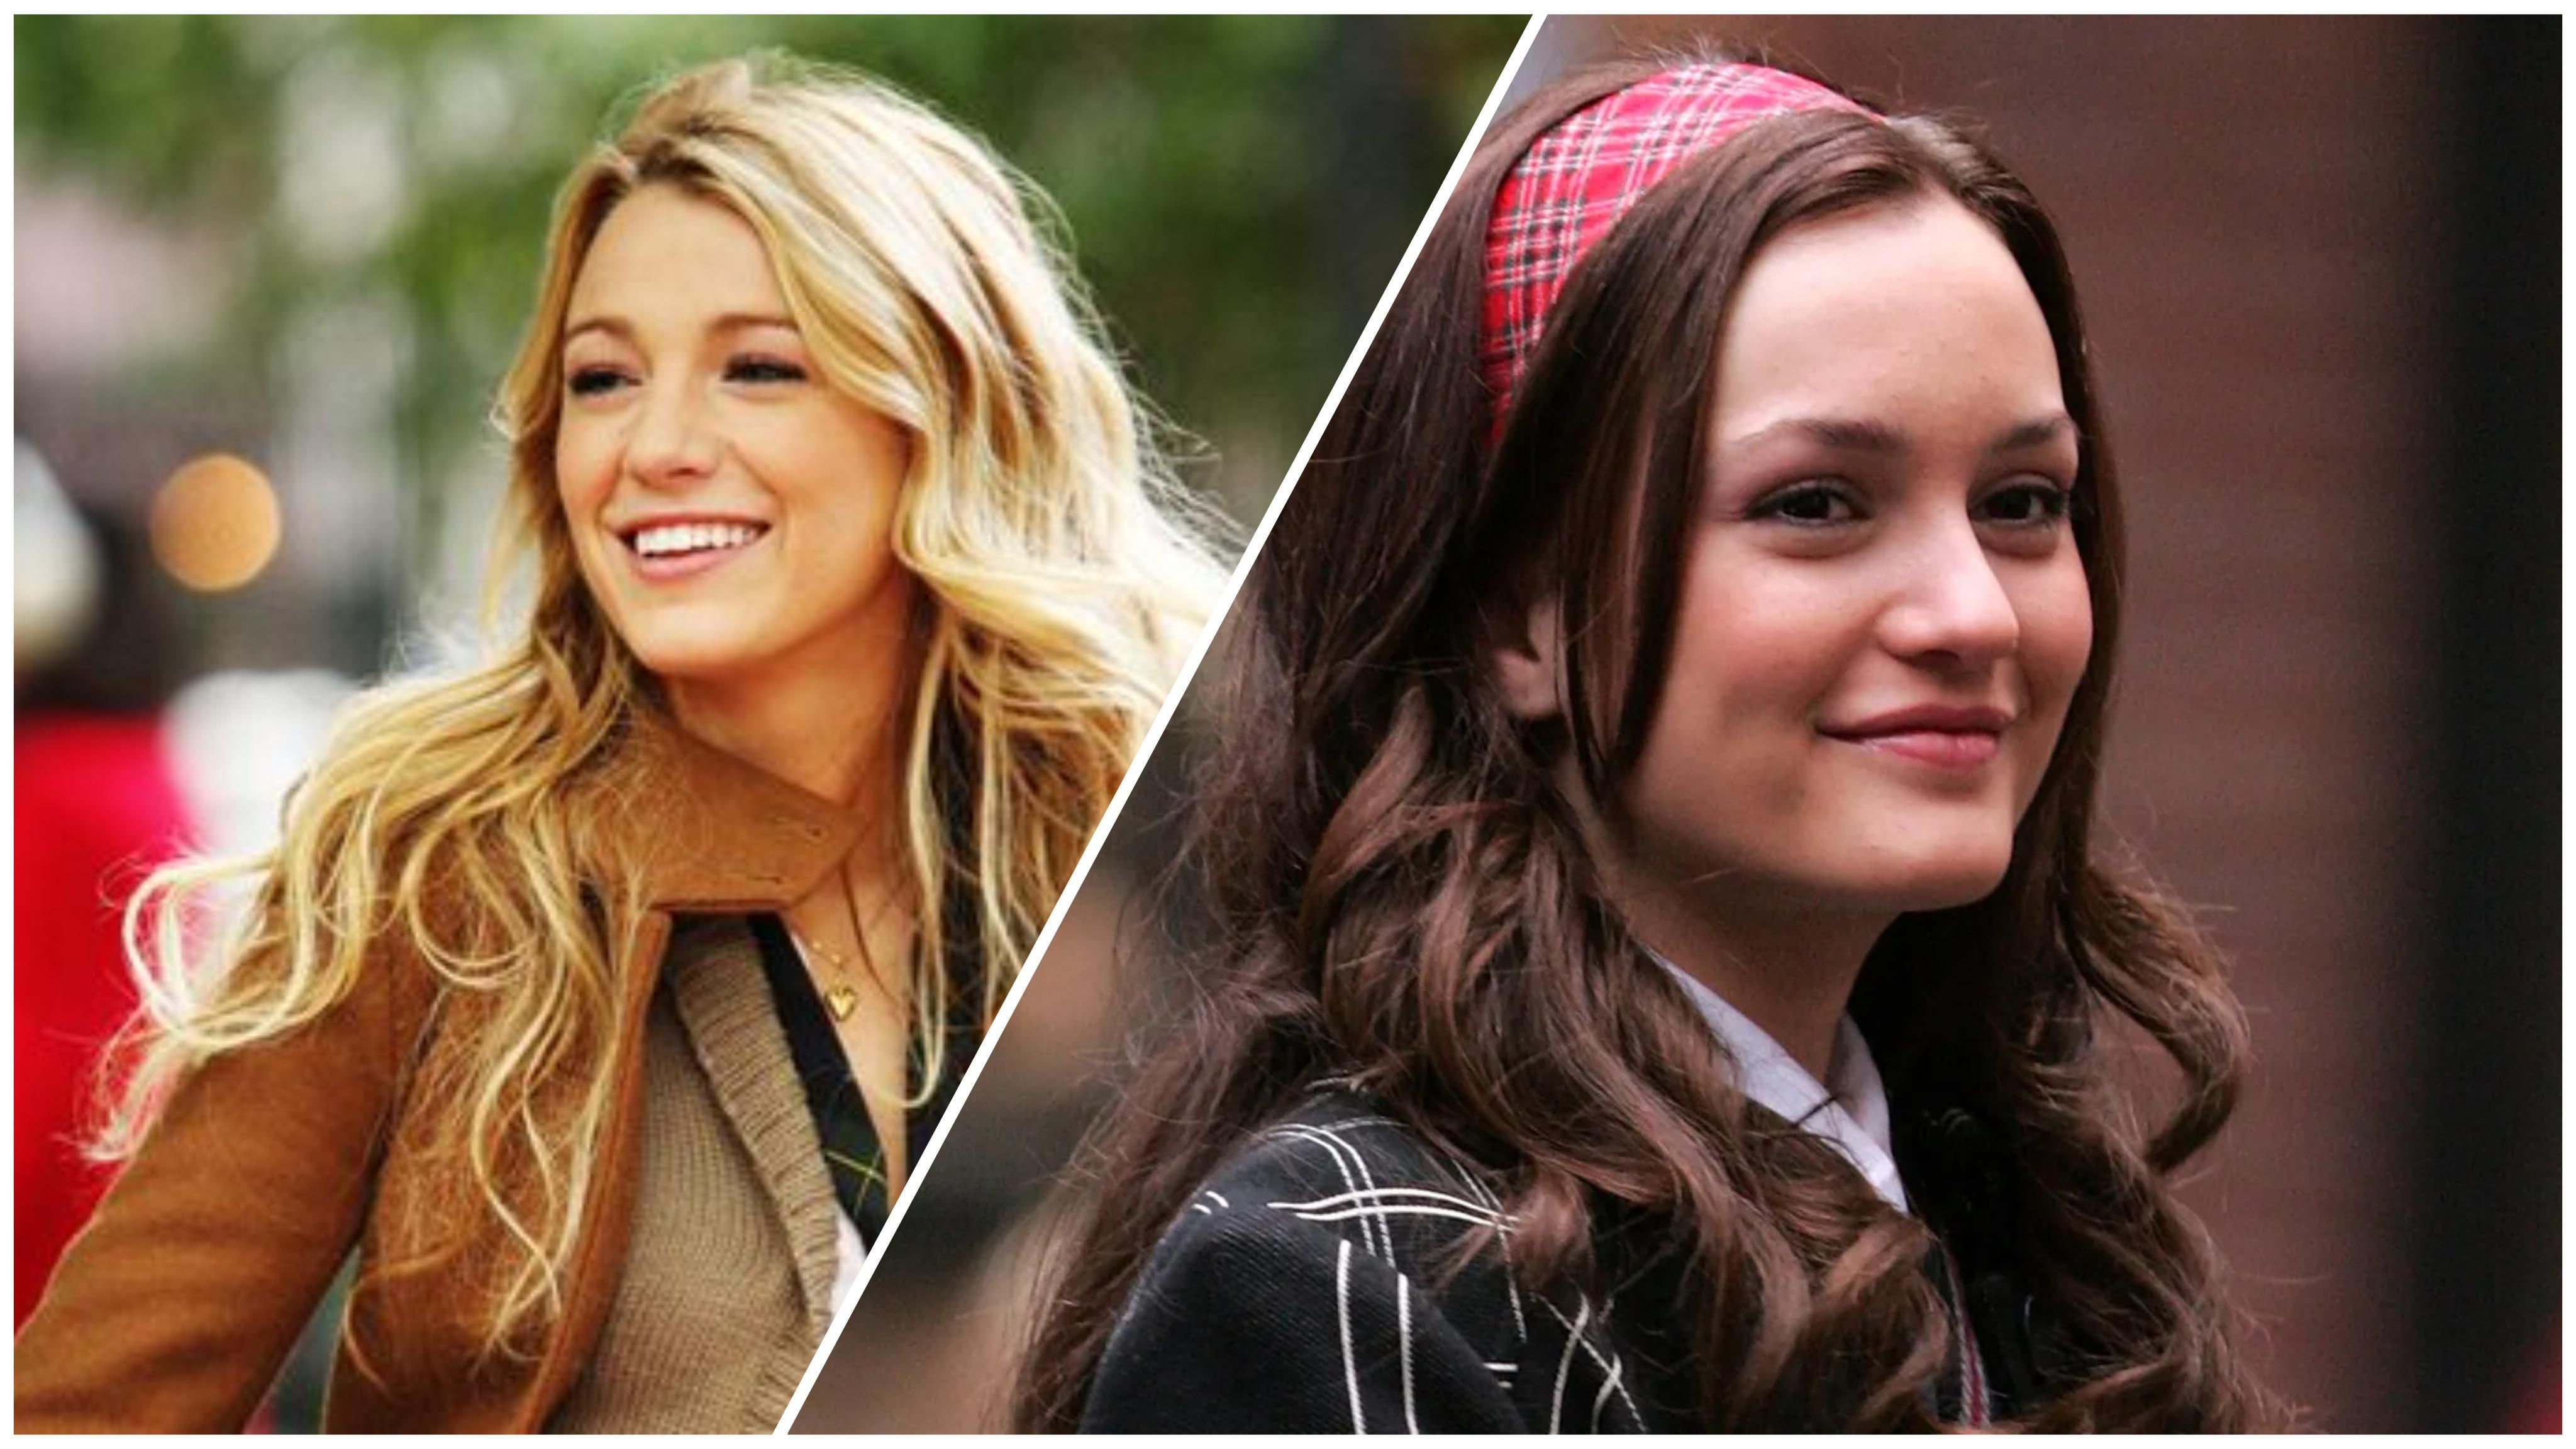 Blair Vs. Serena: Who Was The Real Fashion Icon On "Gossip Girl"?